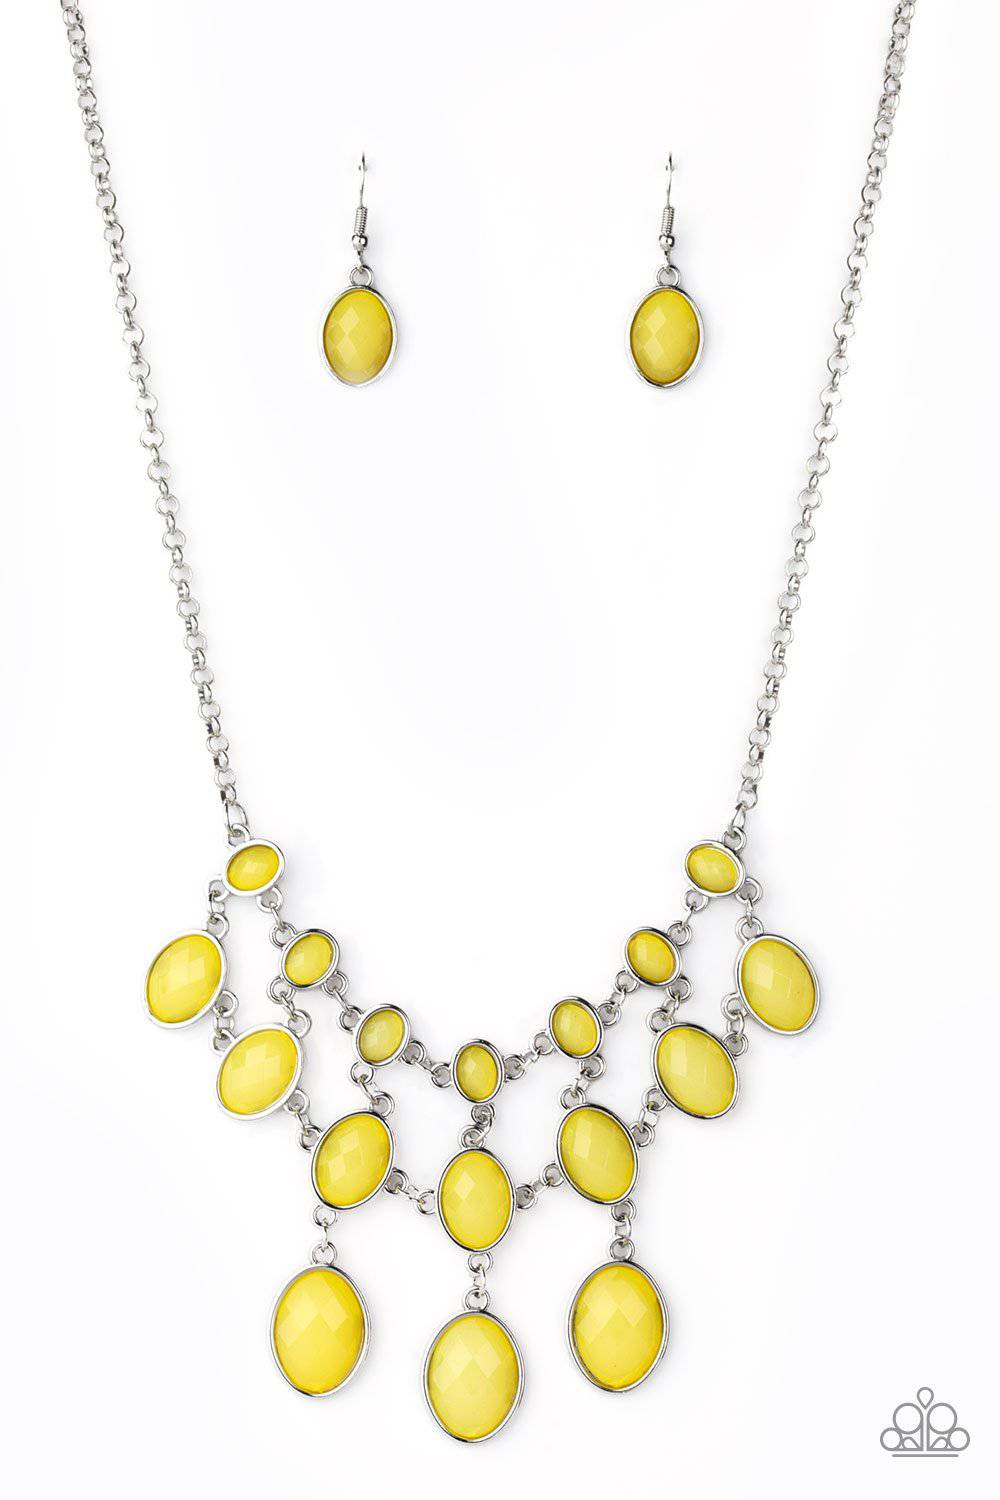 Color Me Neon Yellow Necklace – Ericka C Wise, $5 Jewelry